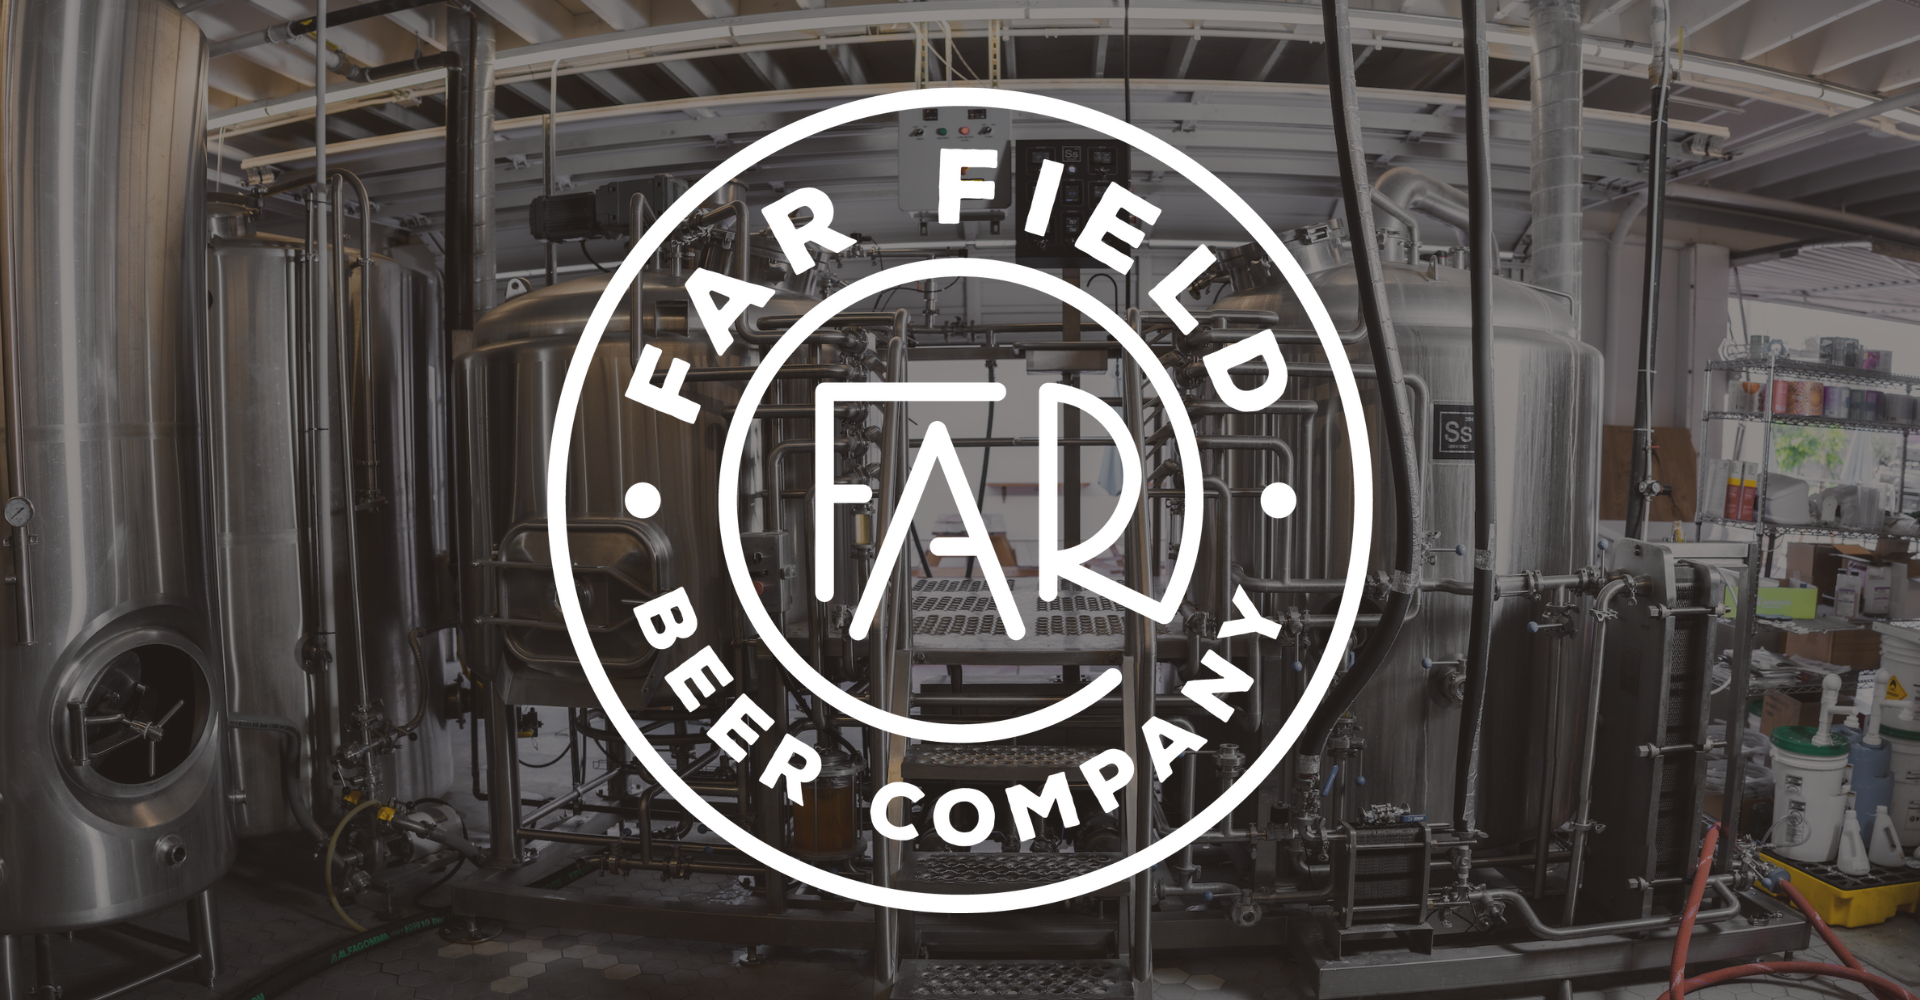 Far Field Finds Its Feet, with Ss Brewtech